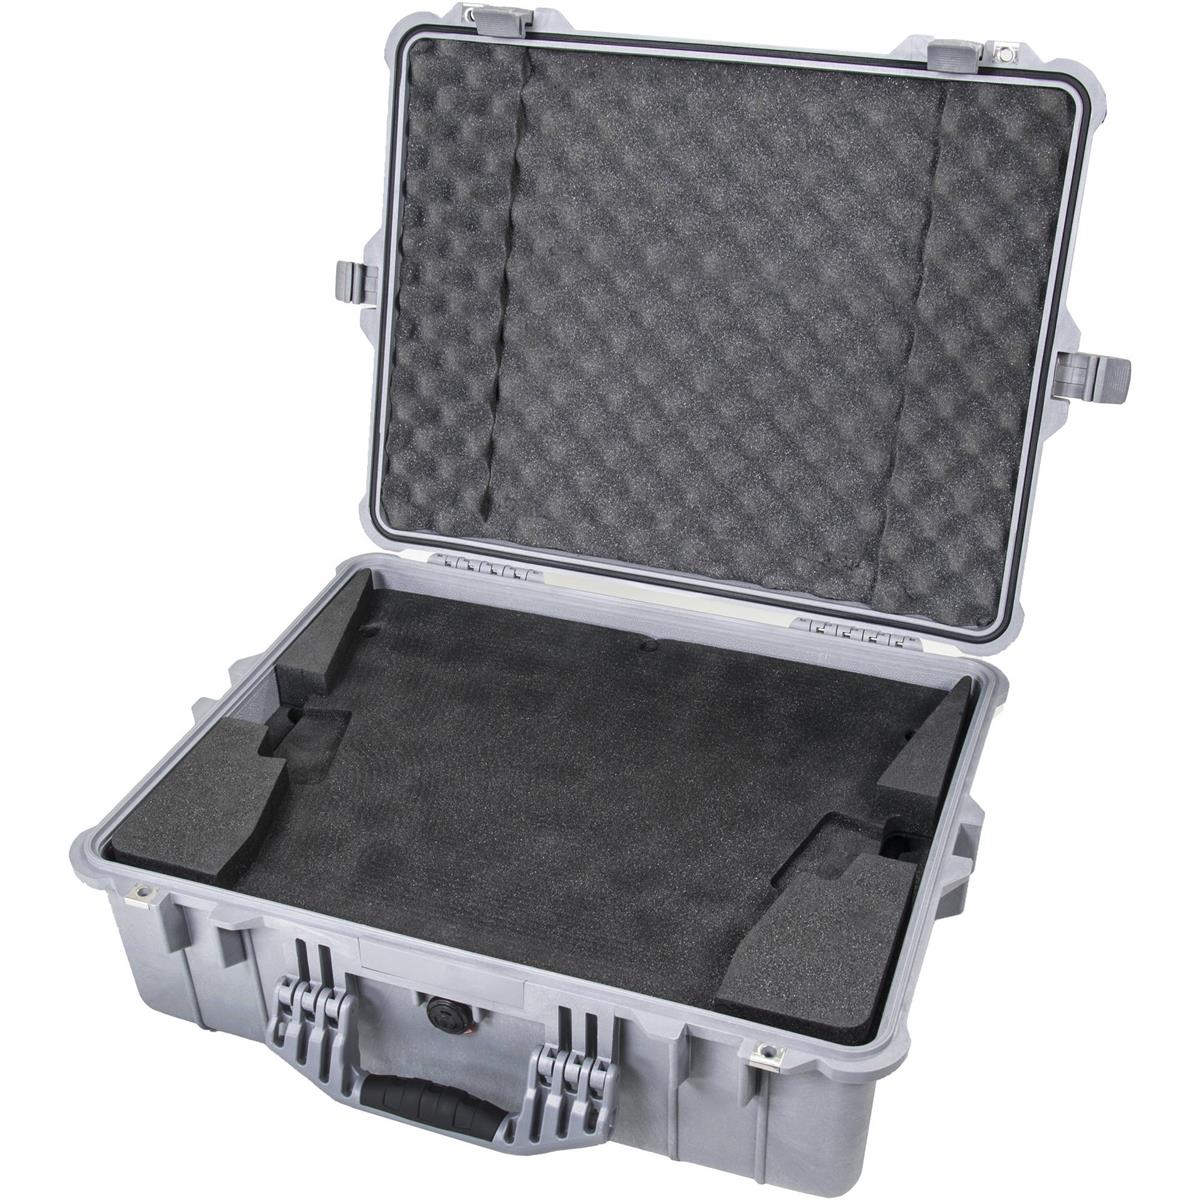 Image of Autocue Case for Prompters with Large Wide-Angle Hoods